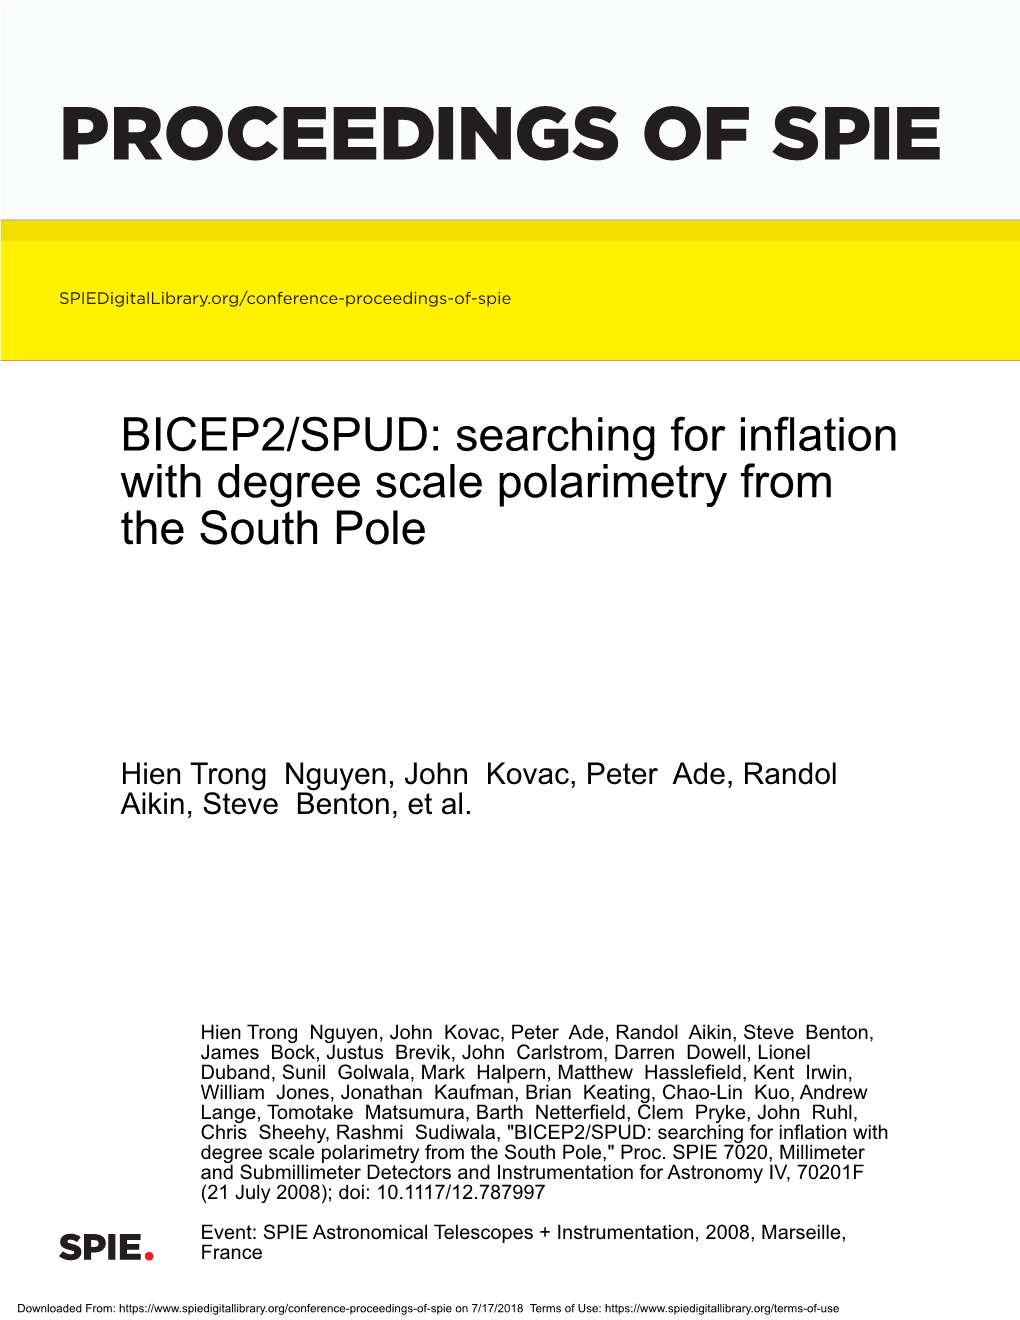 BICEP2/SPUD: Searching for Inflation with Degree Scale Polarimetry from the South Pole